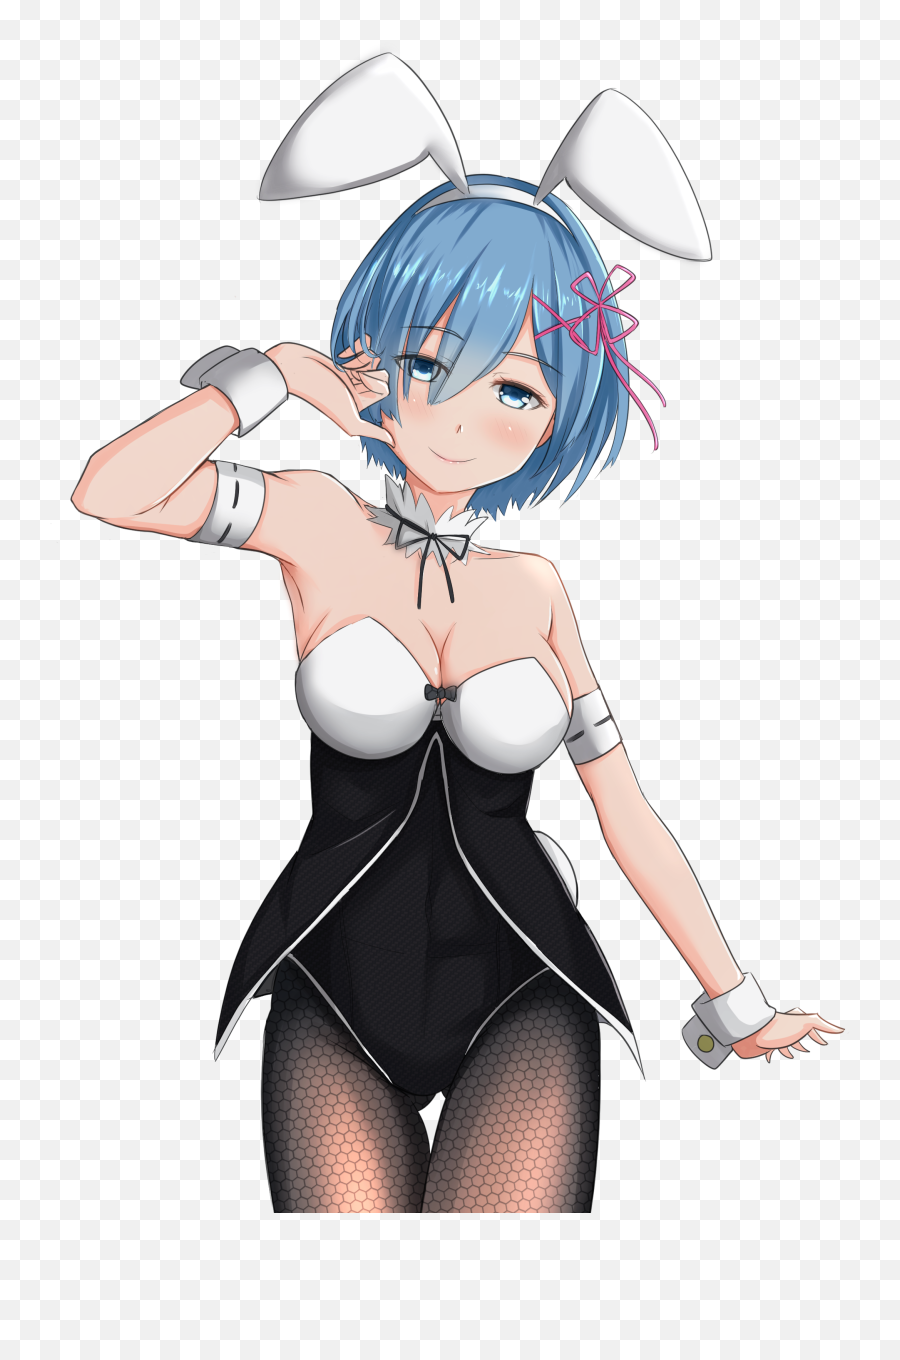 Download Rem - Re Zero Cartoon Png Image With No Rem Full Body Re Zero,Rem Re Zero Png